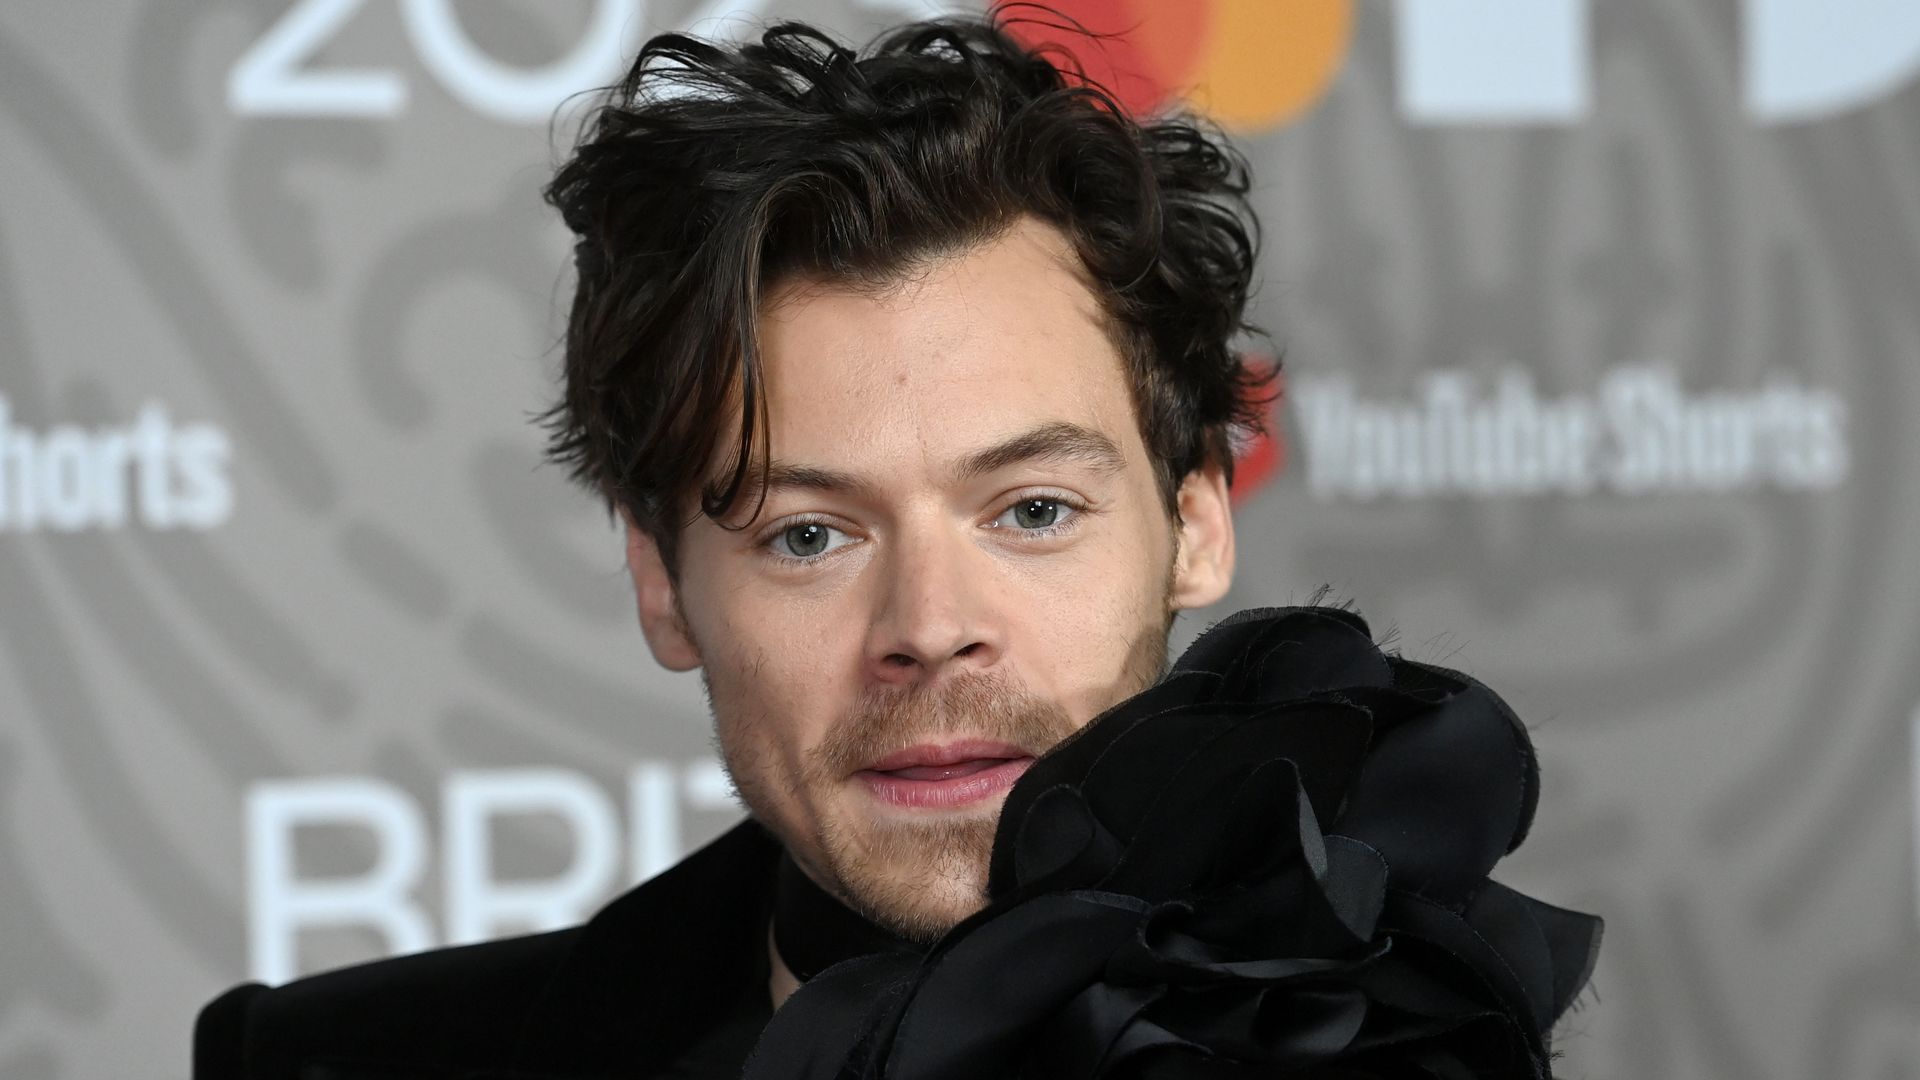 LONDON, ENGLAND - FEBRUARY 11: (EDITORIAL USE ONLY) Harry Styles attends The BRIT Awards 2023 at The O2 Arena on February 11, 2023 in London, England. (Photo by Dave J Hogan/Getty Images)